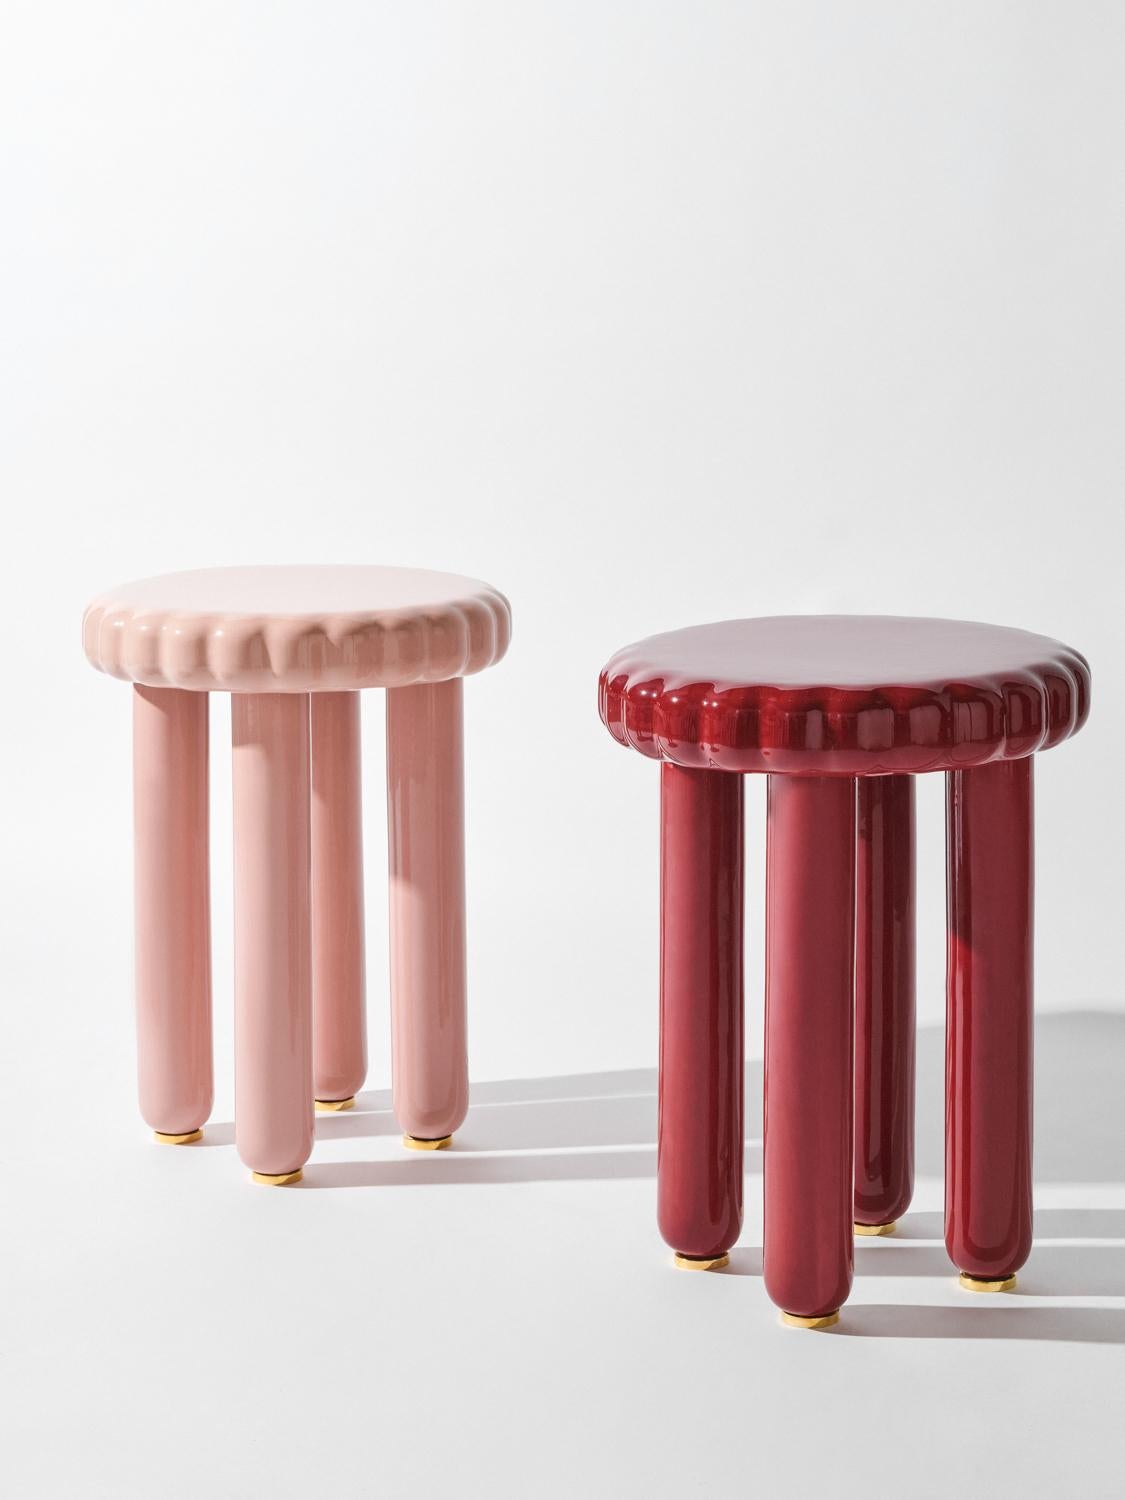 Turkish Contemporary 'Biscotto' Ceramic Stool/Side Table in Macaron by Studio Yellowdot For Sale